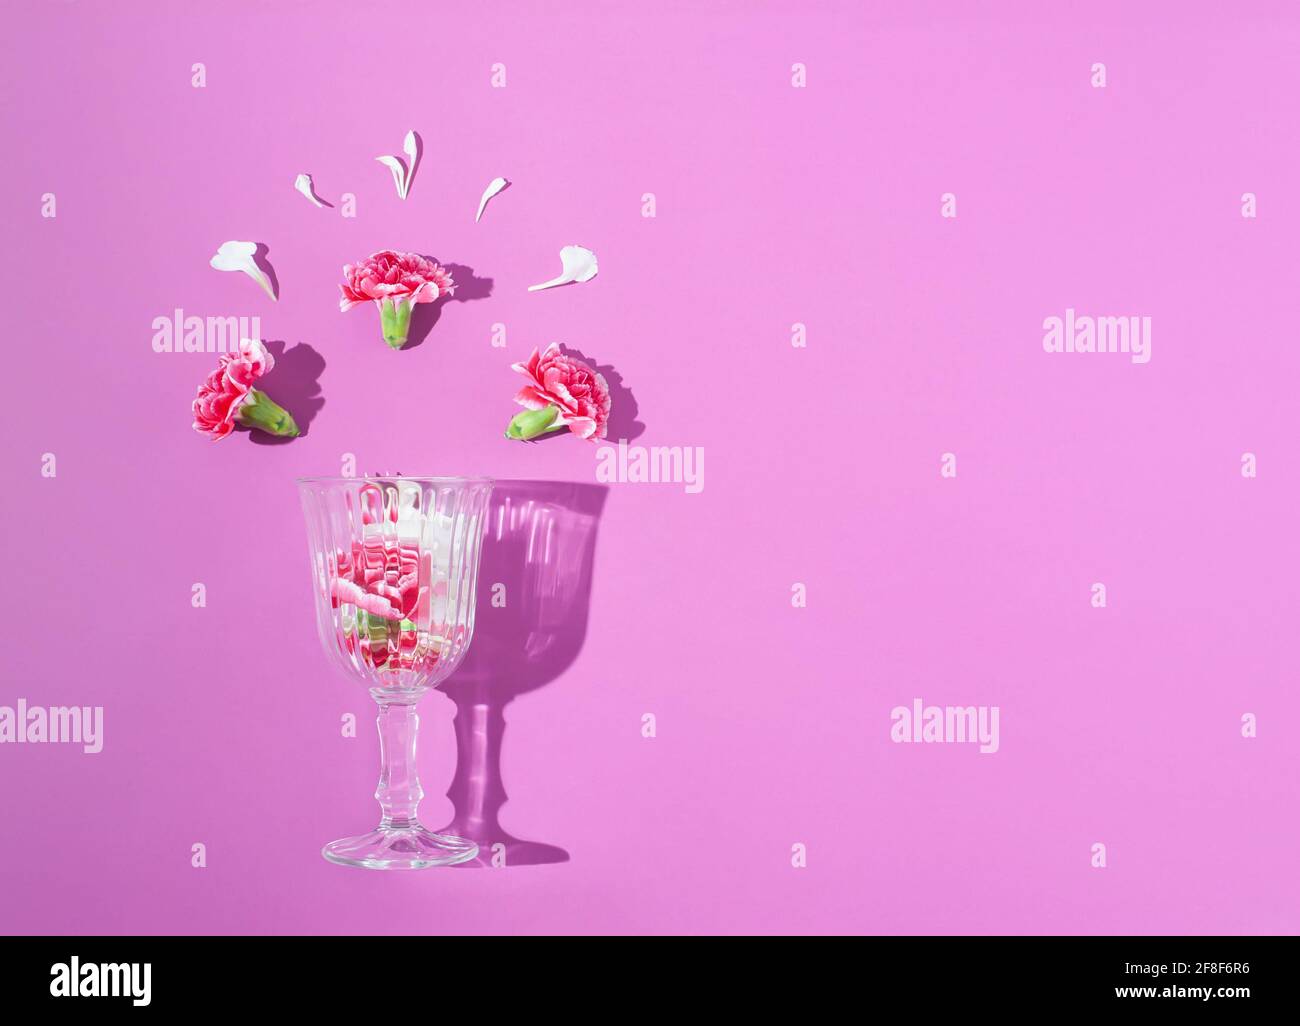 Spring colorful flowers in a wine glass on bright lilac background. Minimal spring concept. Nature background idea. Stock Photo